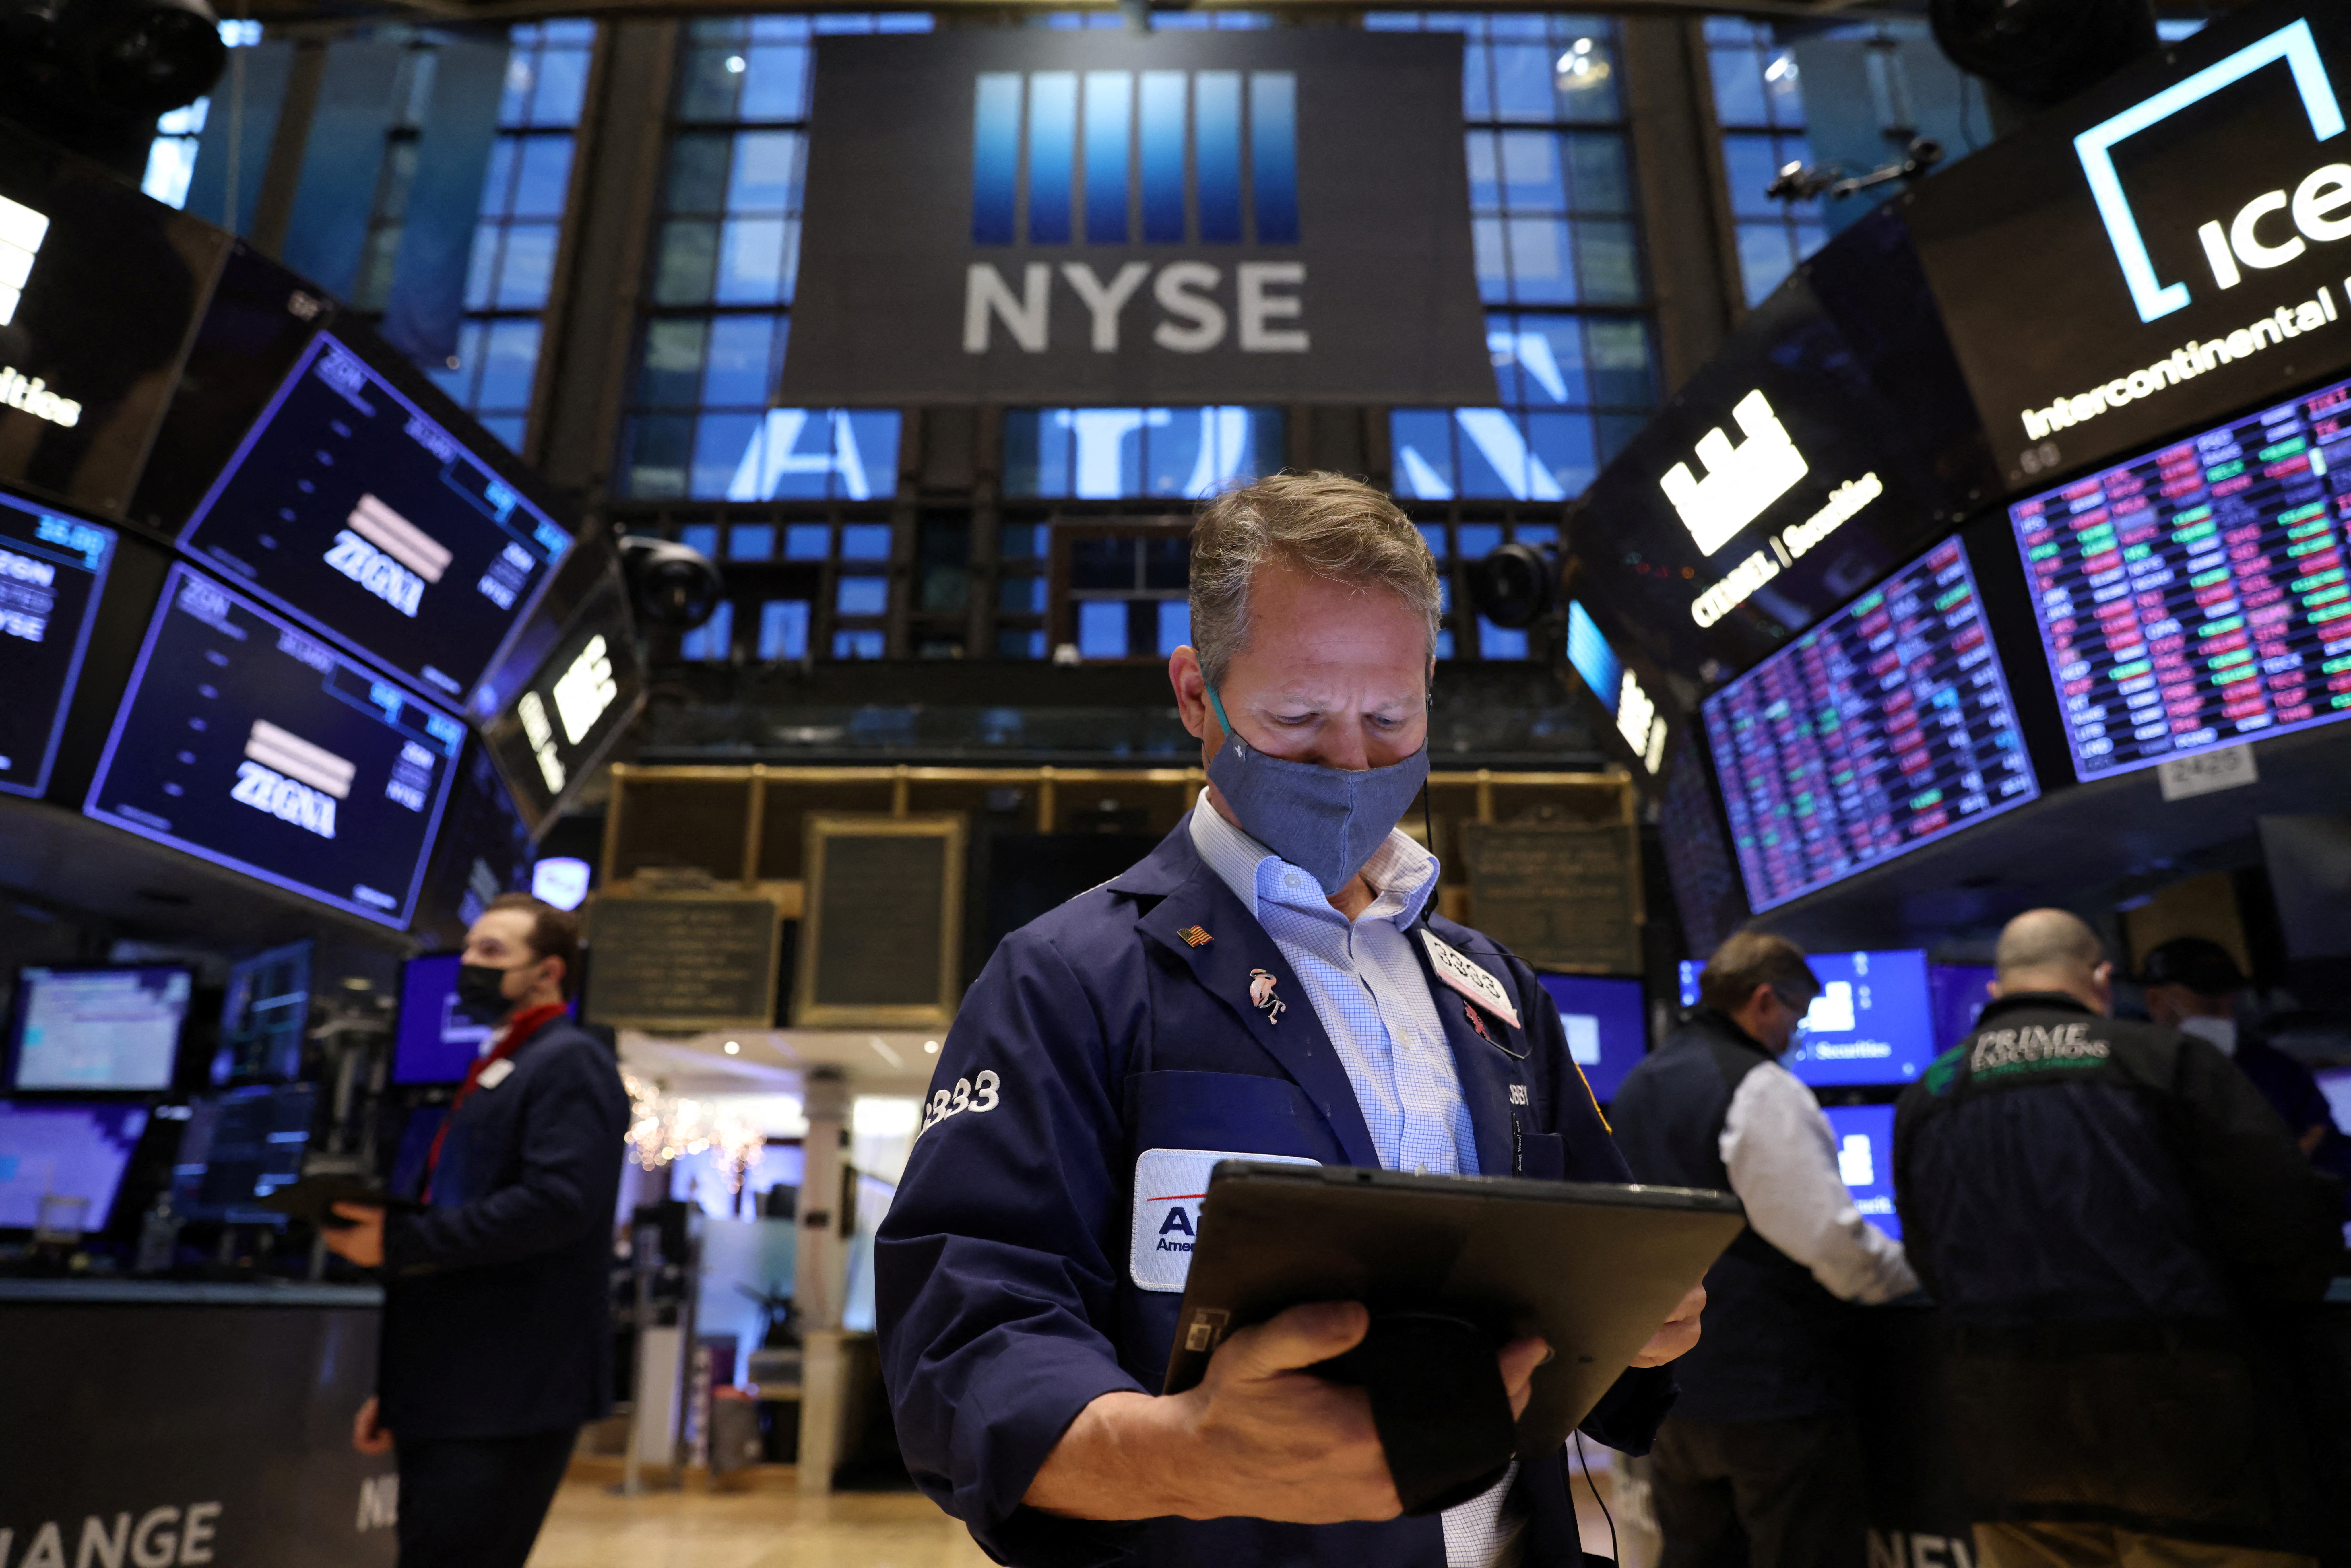 A trader in a face mask works on the trading floor at the New York Stock Exchange (NYSE) as the Omicron coronavirus variant continues to spread in Manhattan, New York City, U.S., December 20, 2021. REUTERS/Andrew Kelly